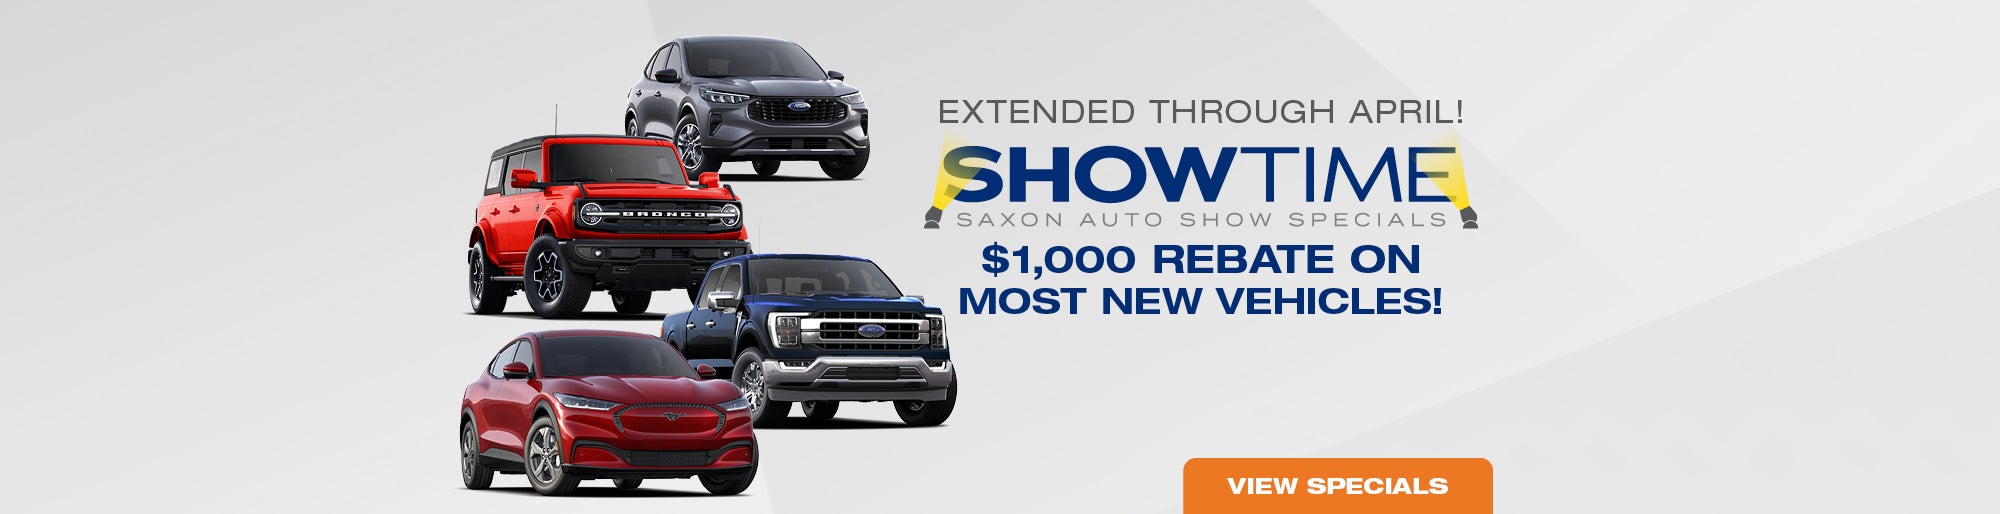 $1,000 Rebate on Most New Vehicles